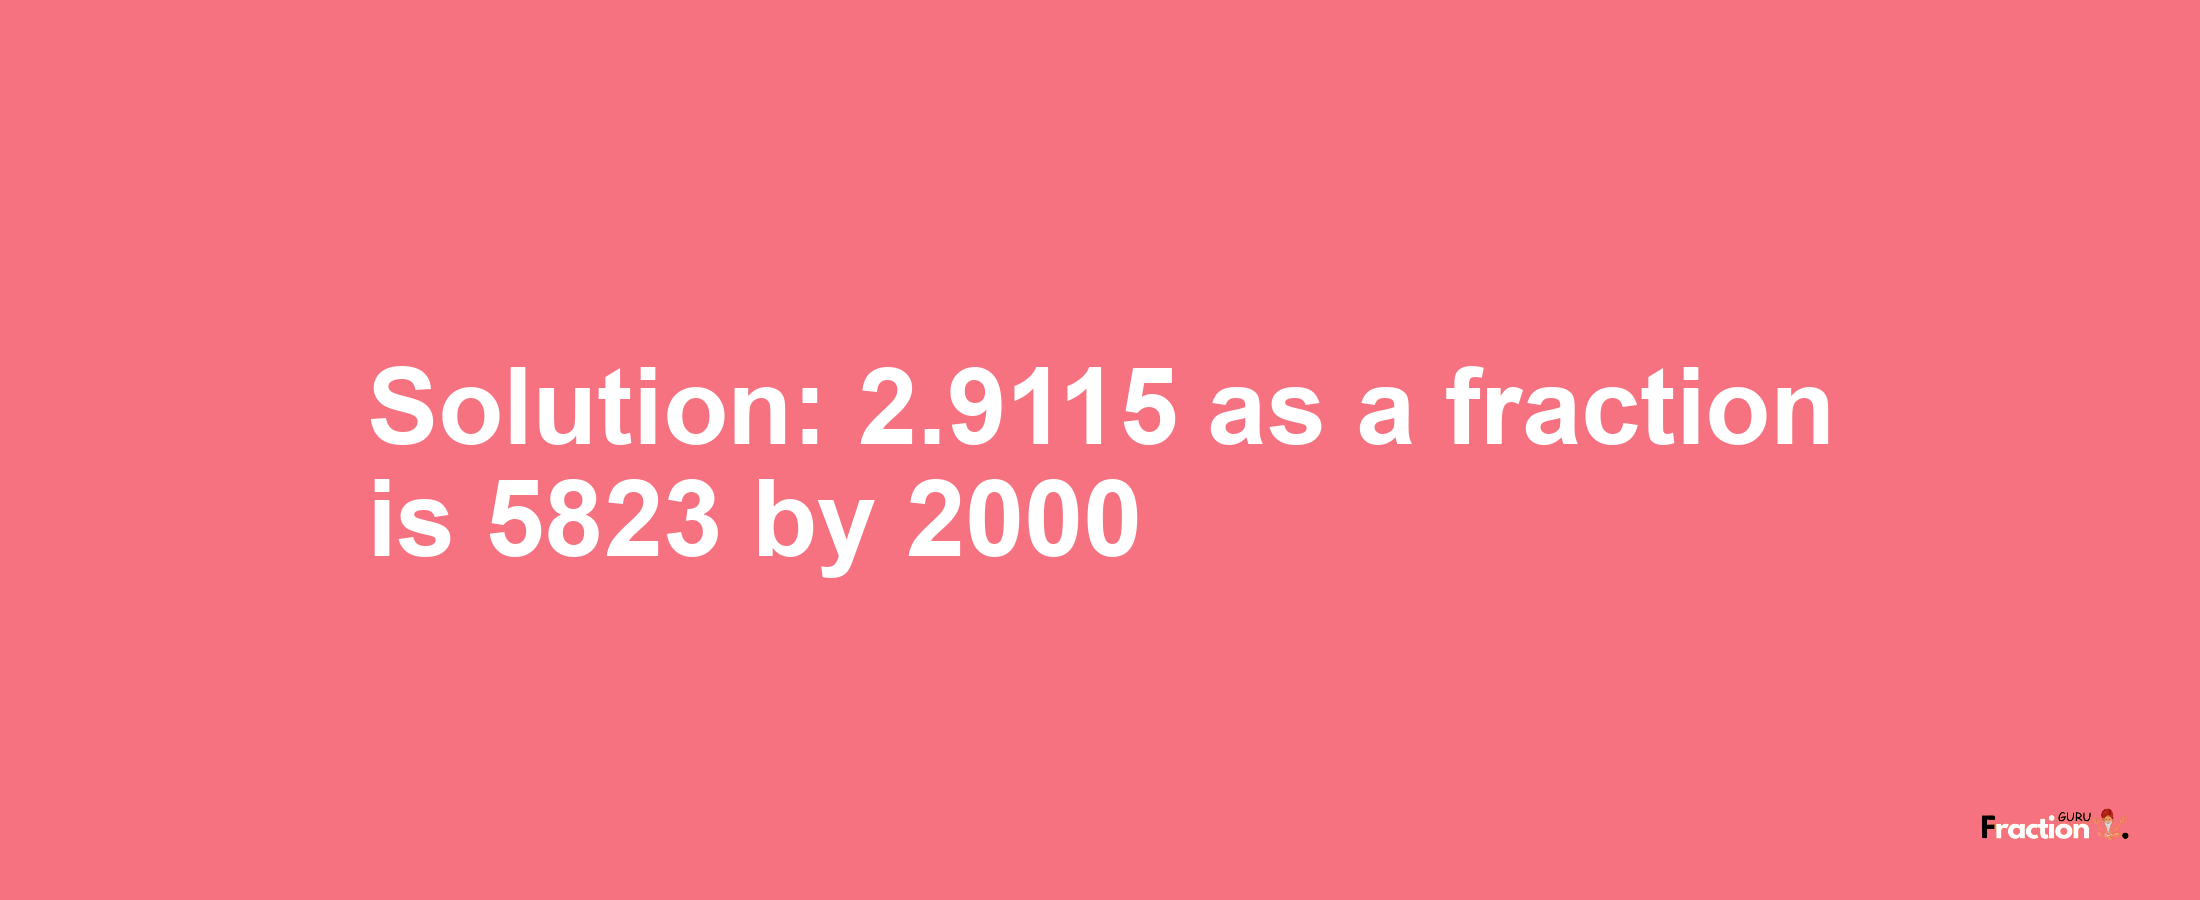 Solution:2.9115 as a fraction is 5823/2000